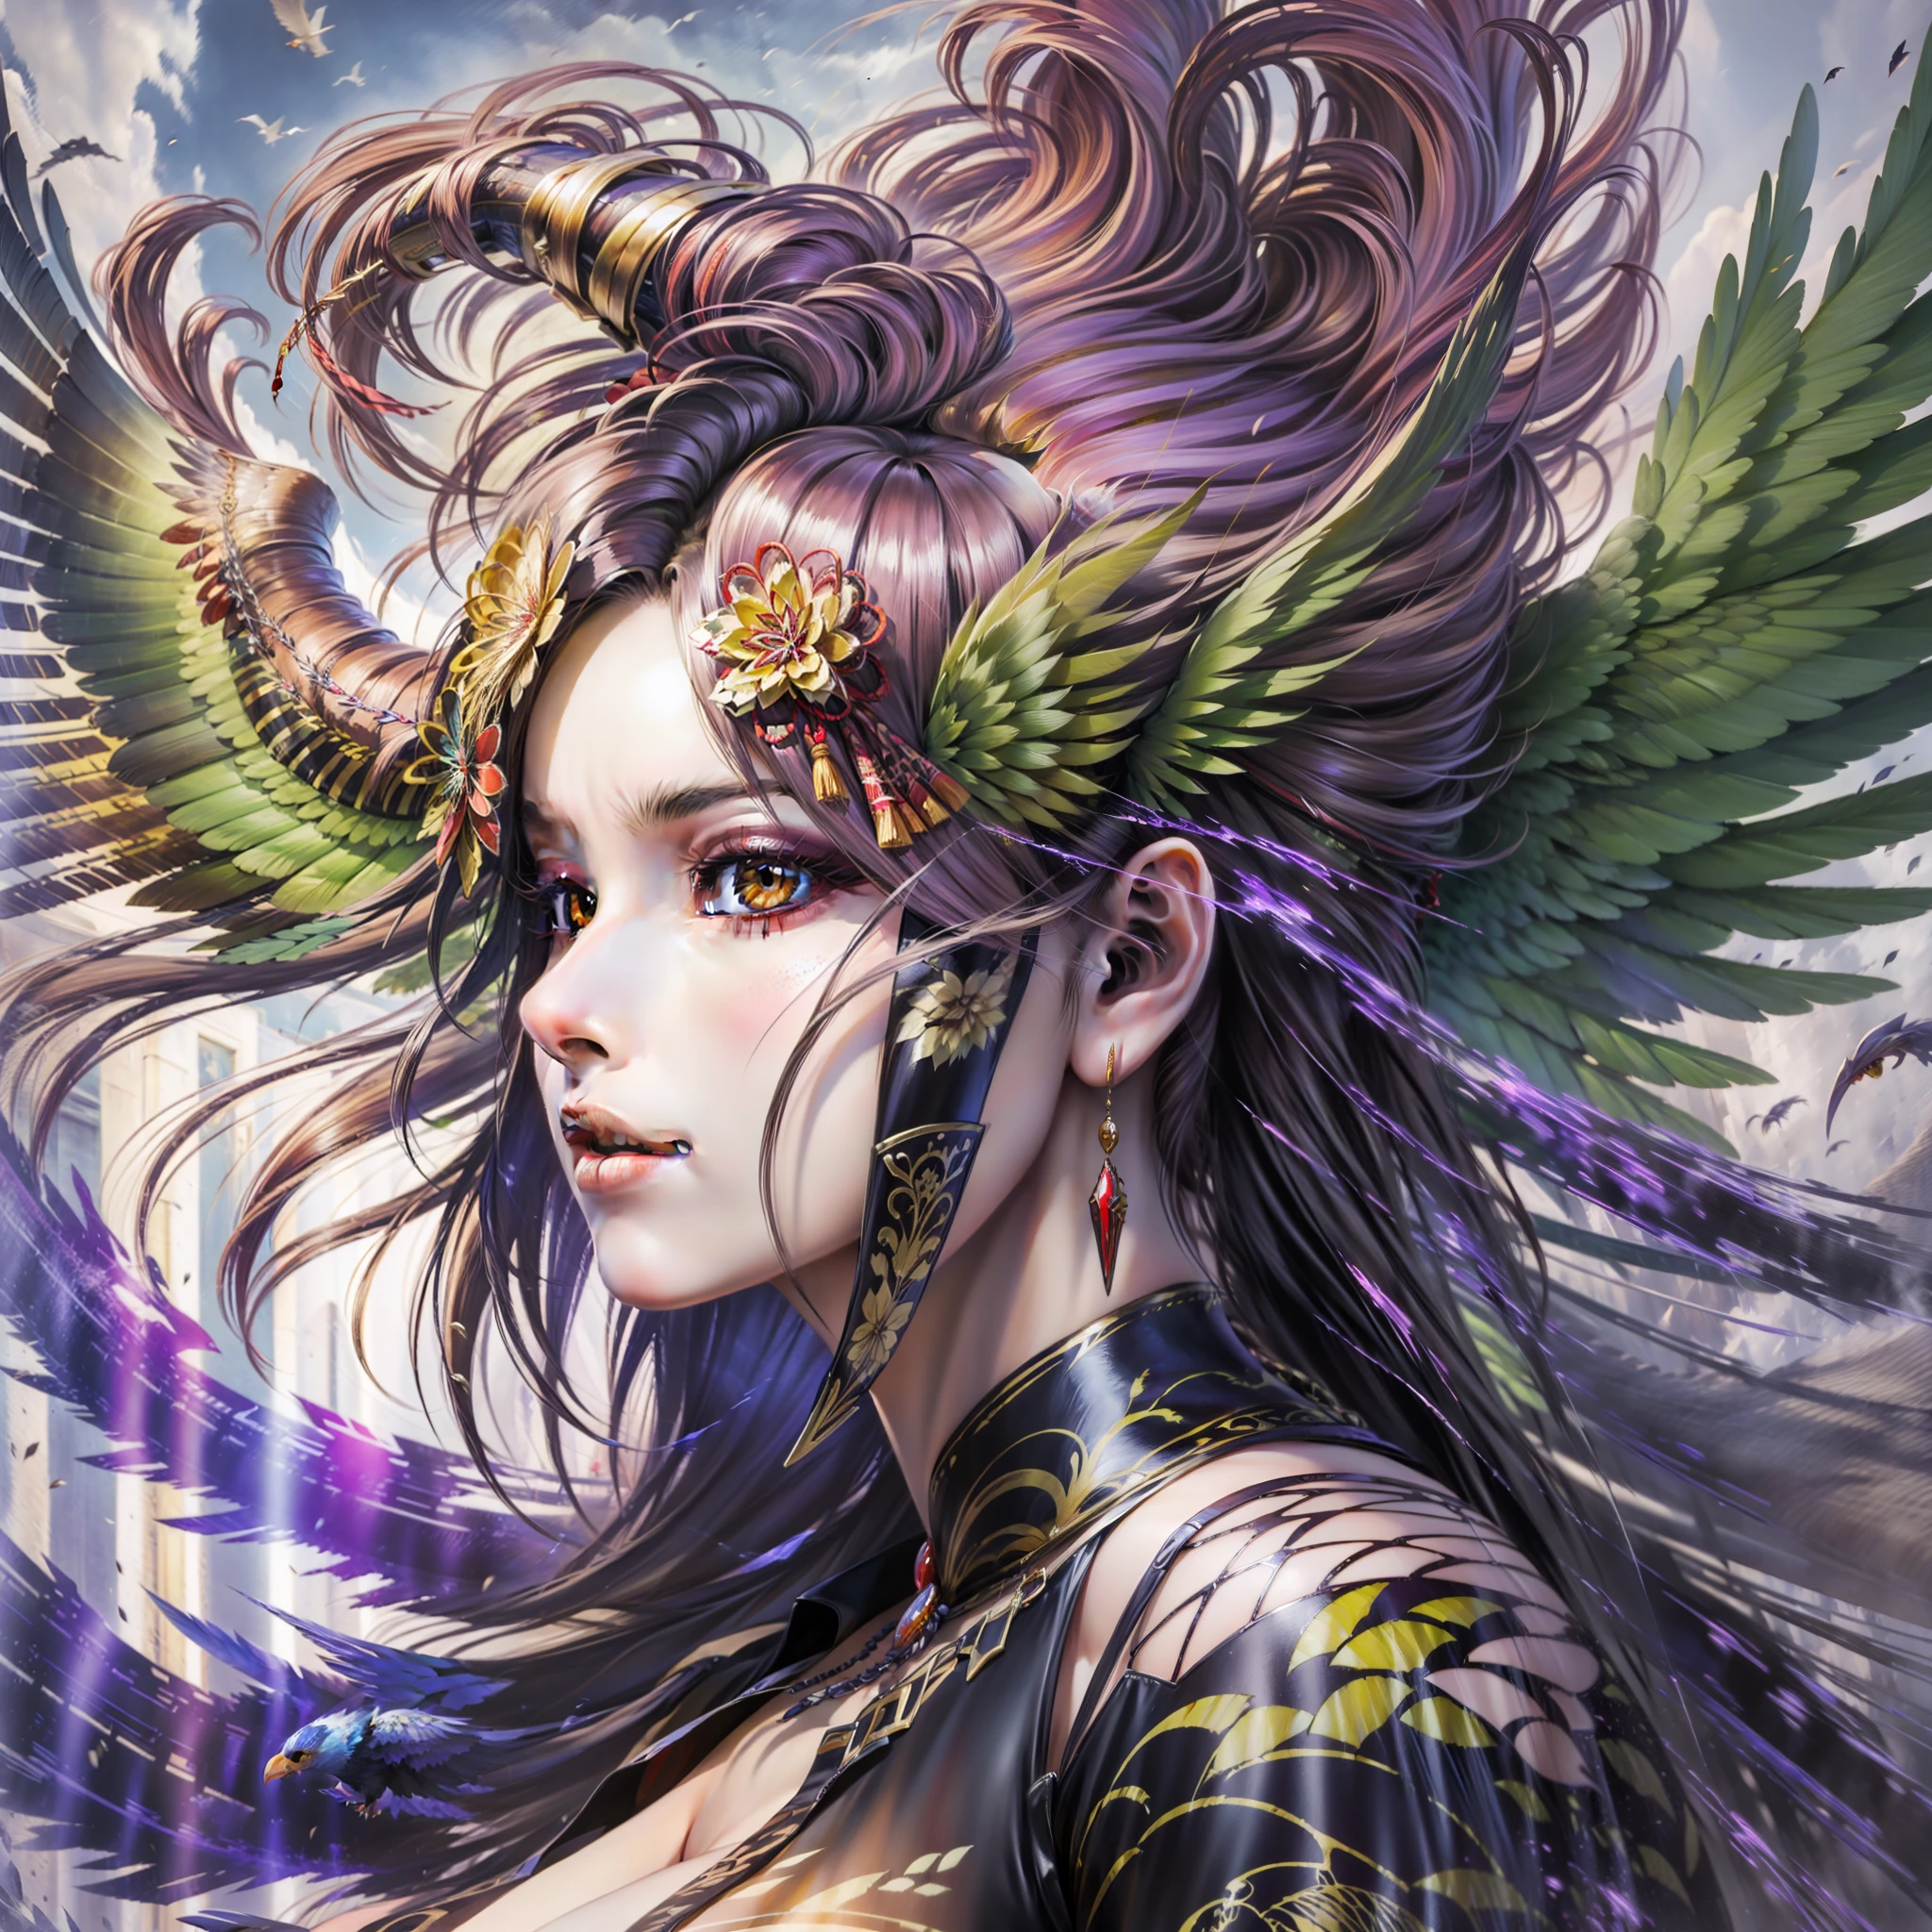 an f18 hornet WITH EAGLE WINGS, fantasy art,hyper realistic, super detailed, heat haze, 4K, by Yoshitaka Amano, Ellen Jewett, and Leonora Carrington AND boris vallejo:: A detailed, elegant, intricate, colorful portrait in mixed media:: A masterpiece of surreal art, a vibrant painting, vibrant colors